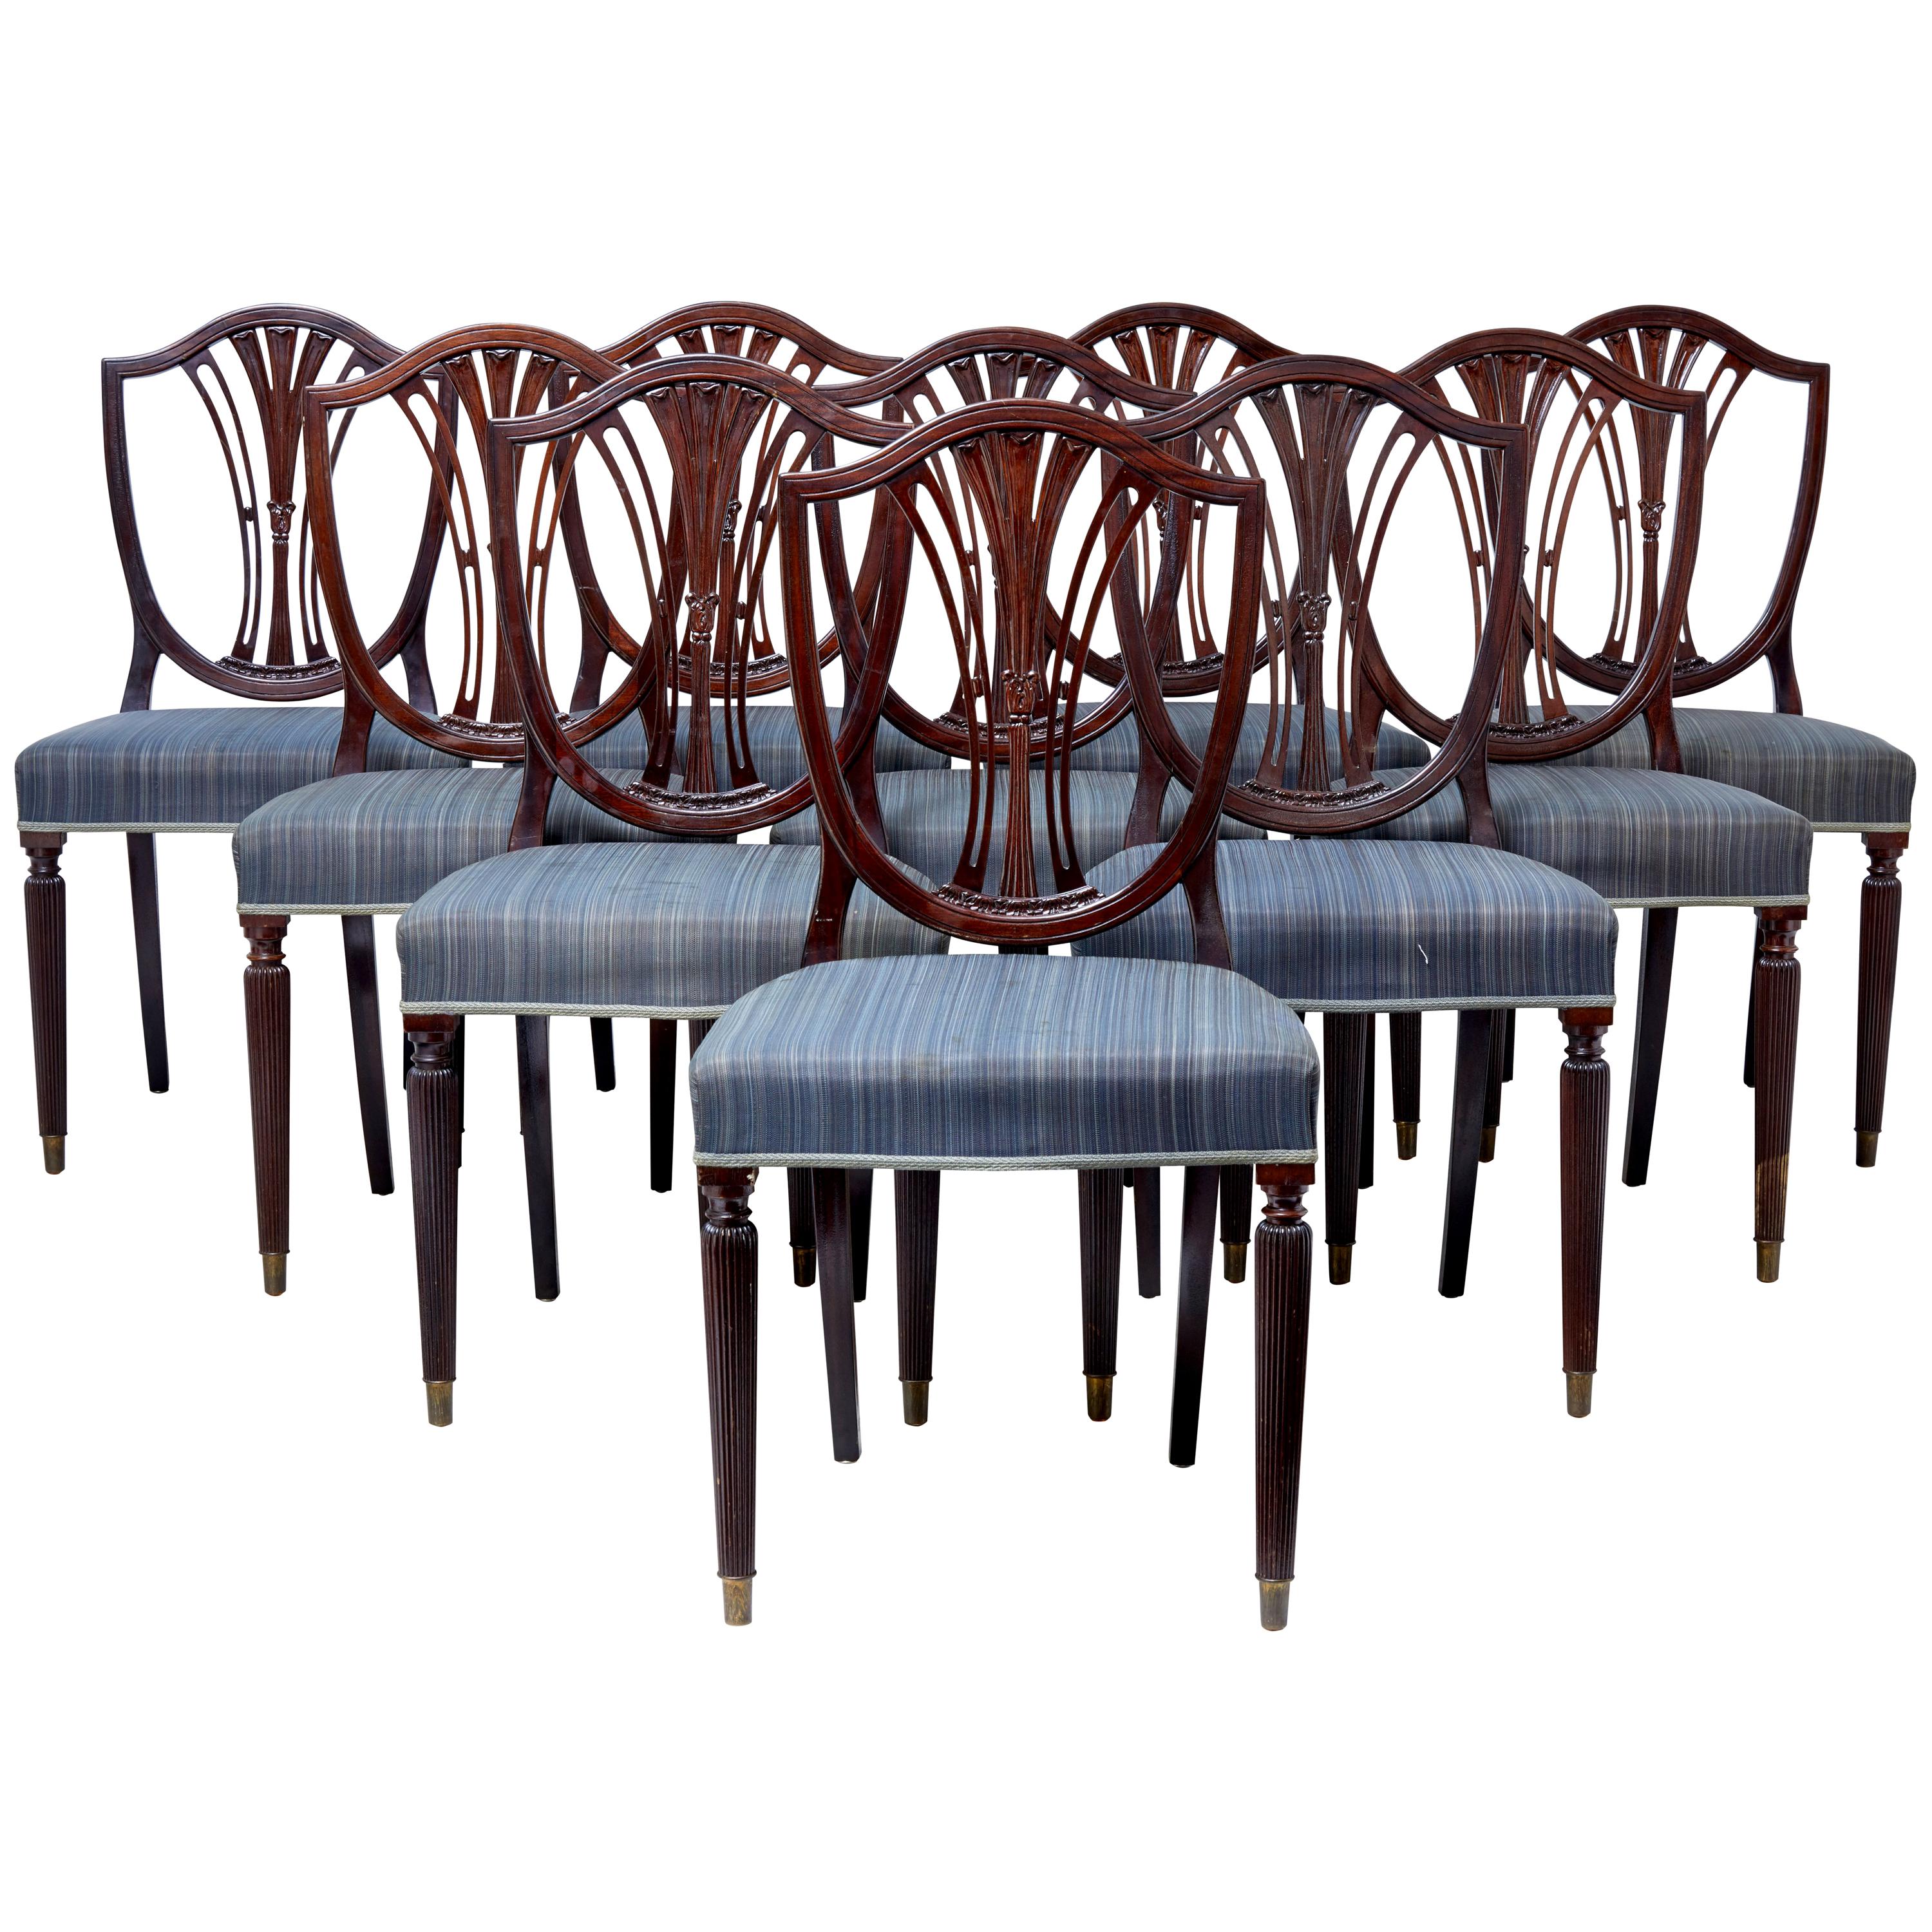 Set of Ten Early 20th Century Mahogany Shield Back Dining Chairs